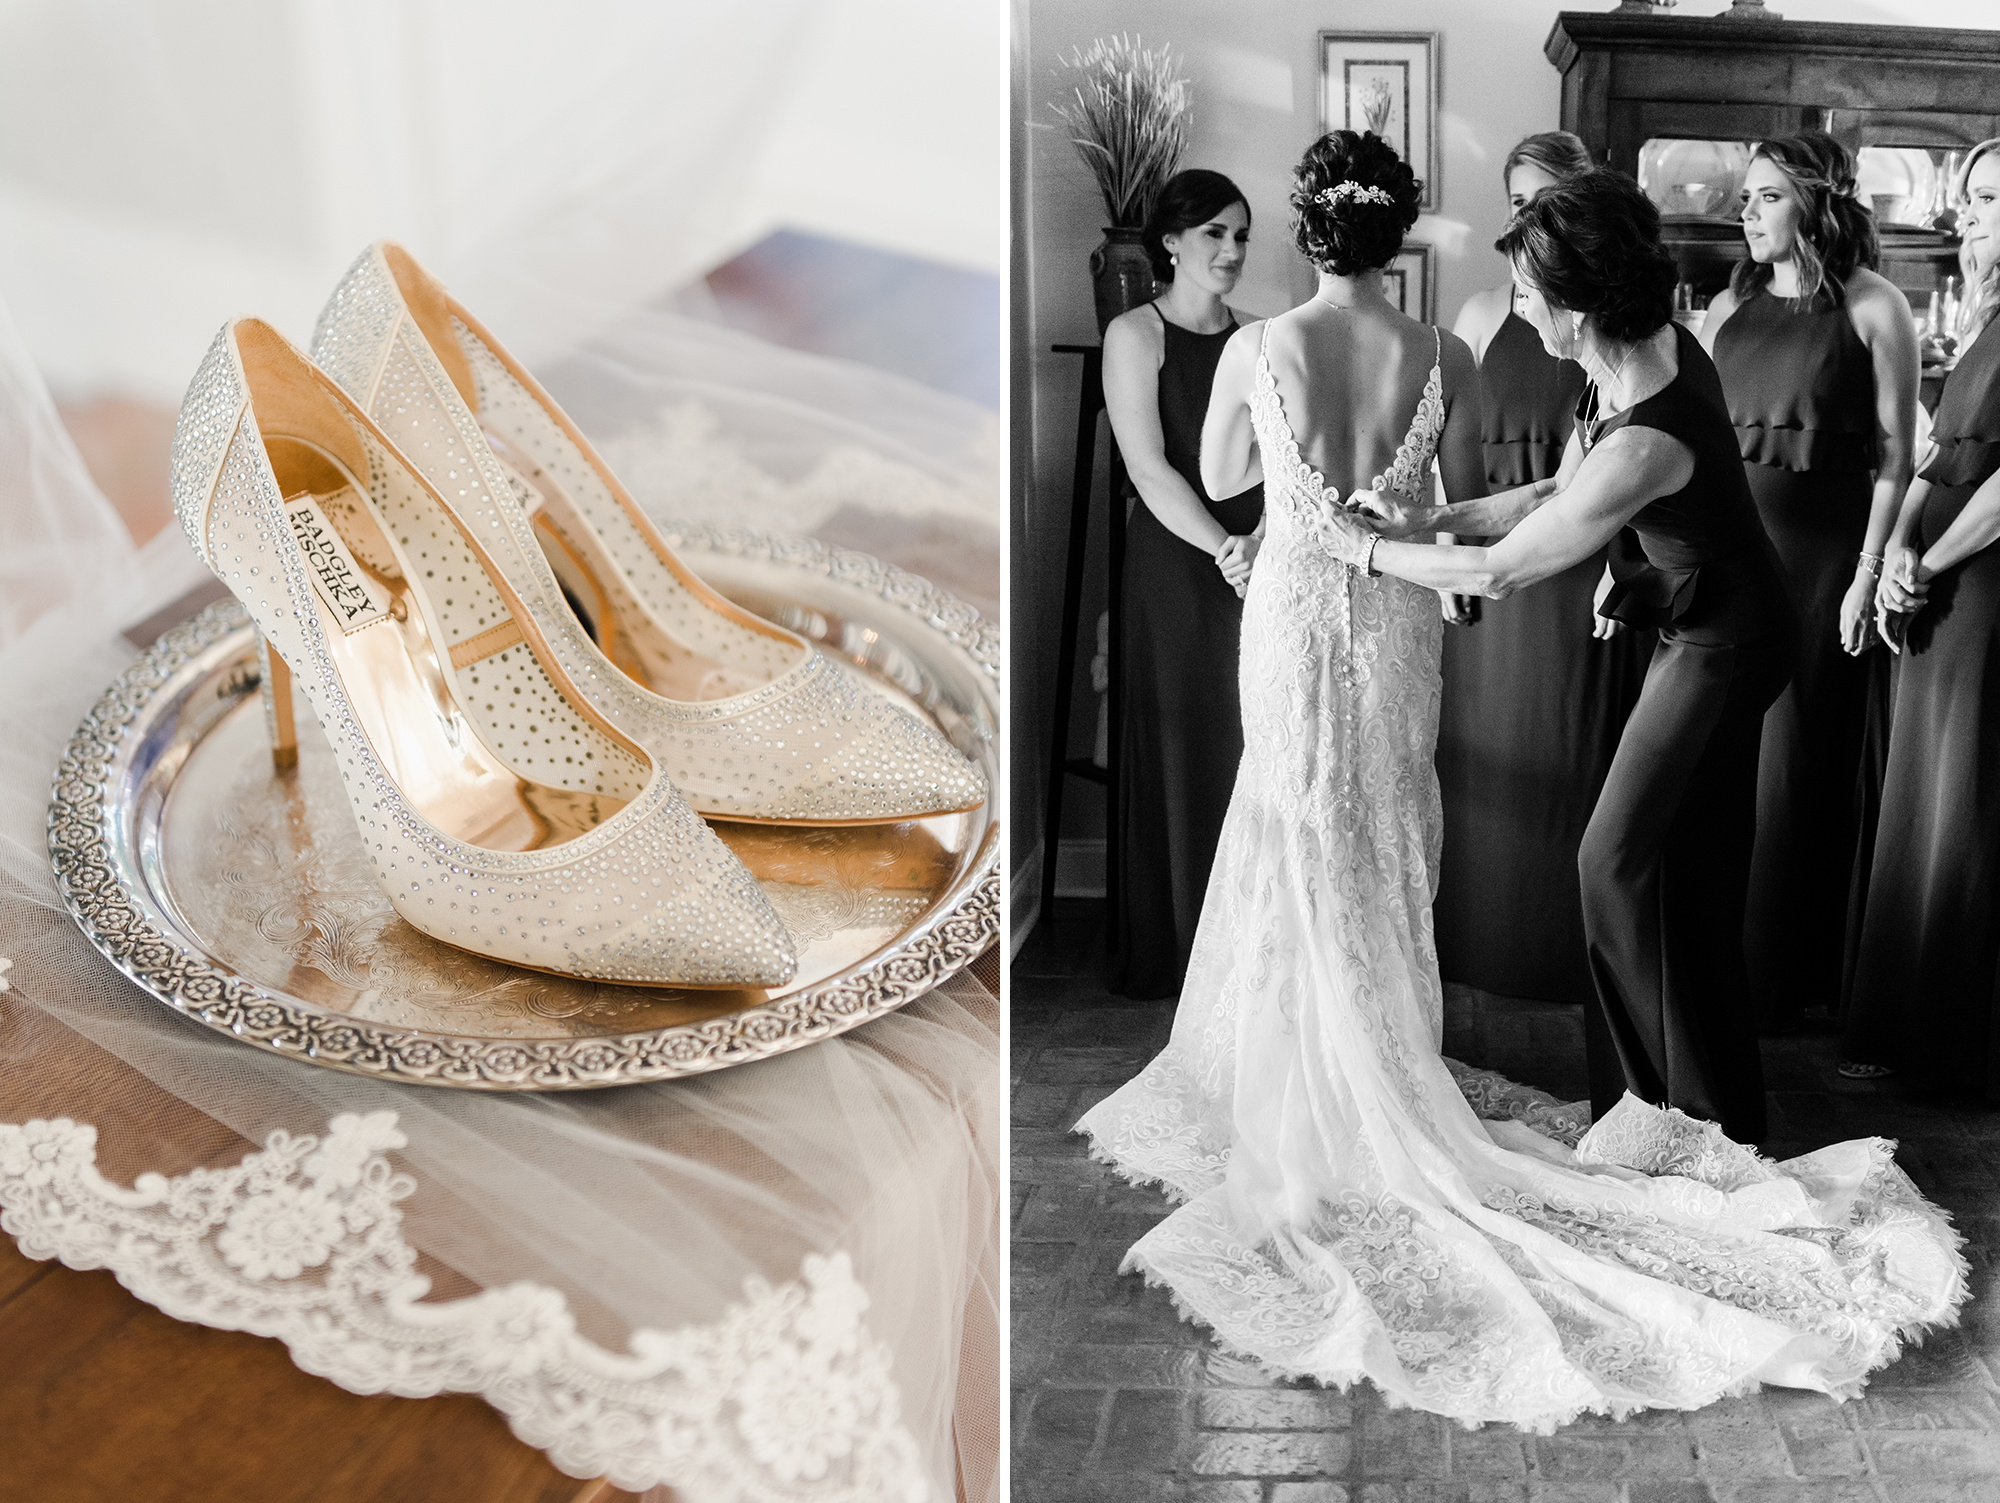 Bride's shoes and veil; Bride getting ready with help from mom